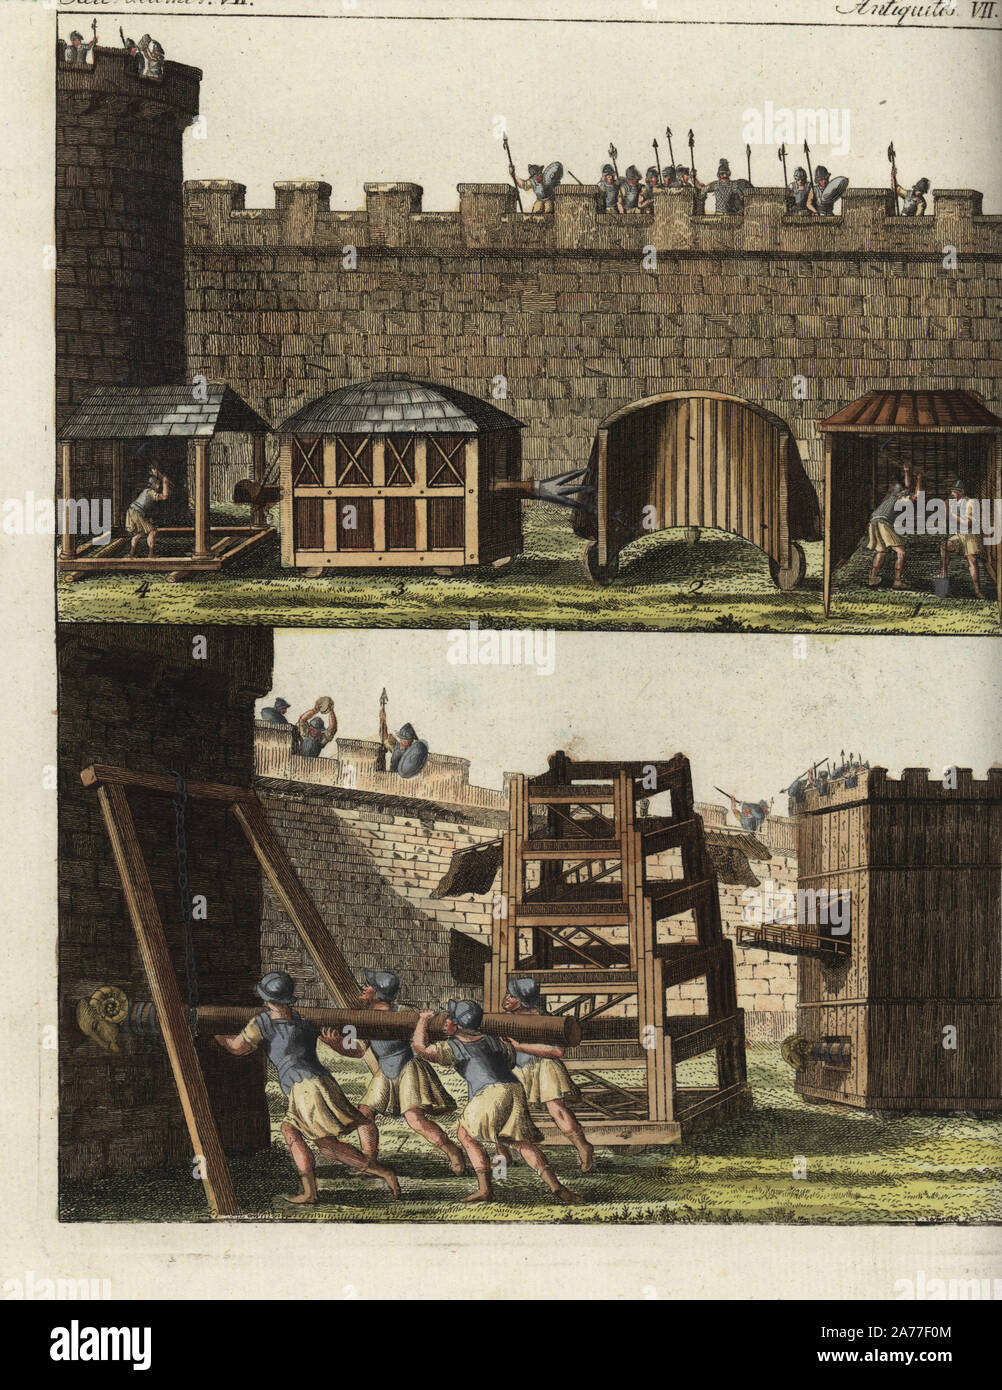 Roman siege engines: shelter for sappers digging a tunnel, Vineae 1, semi-circular shelter Pluteus 2, shelter Testudo with battering ram Aries 3, shelter on rolling cylinders Musculus 4, siege tower or the Taker of Cities, Helepolis 5, five-storey tower Sambucae 6, and battering ram on chains Aries 7. Handcoloured copperplate engraving from Friedrich Johann Bertuch's Bilderbuch fur Kinder (Picture Book for Children), Weimar, 1795. Stock Photo